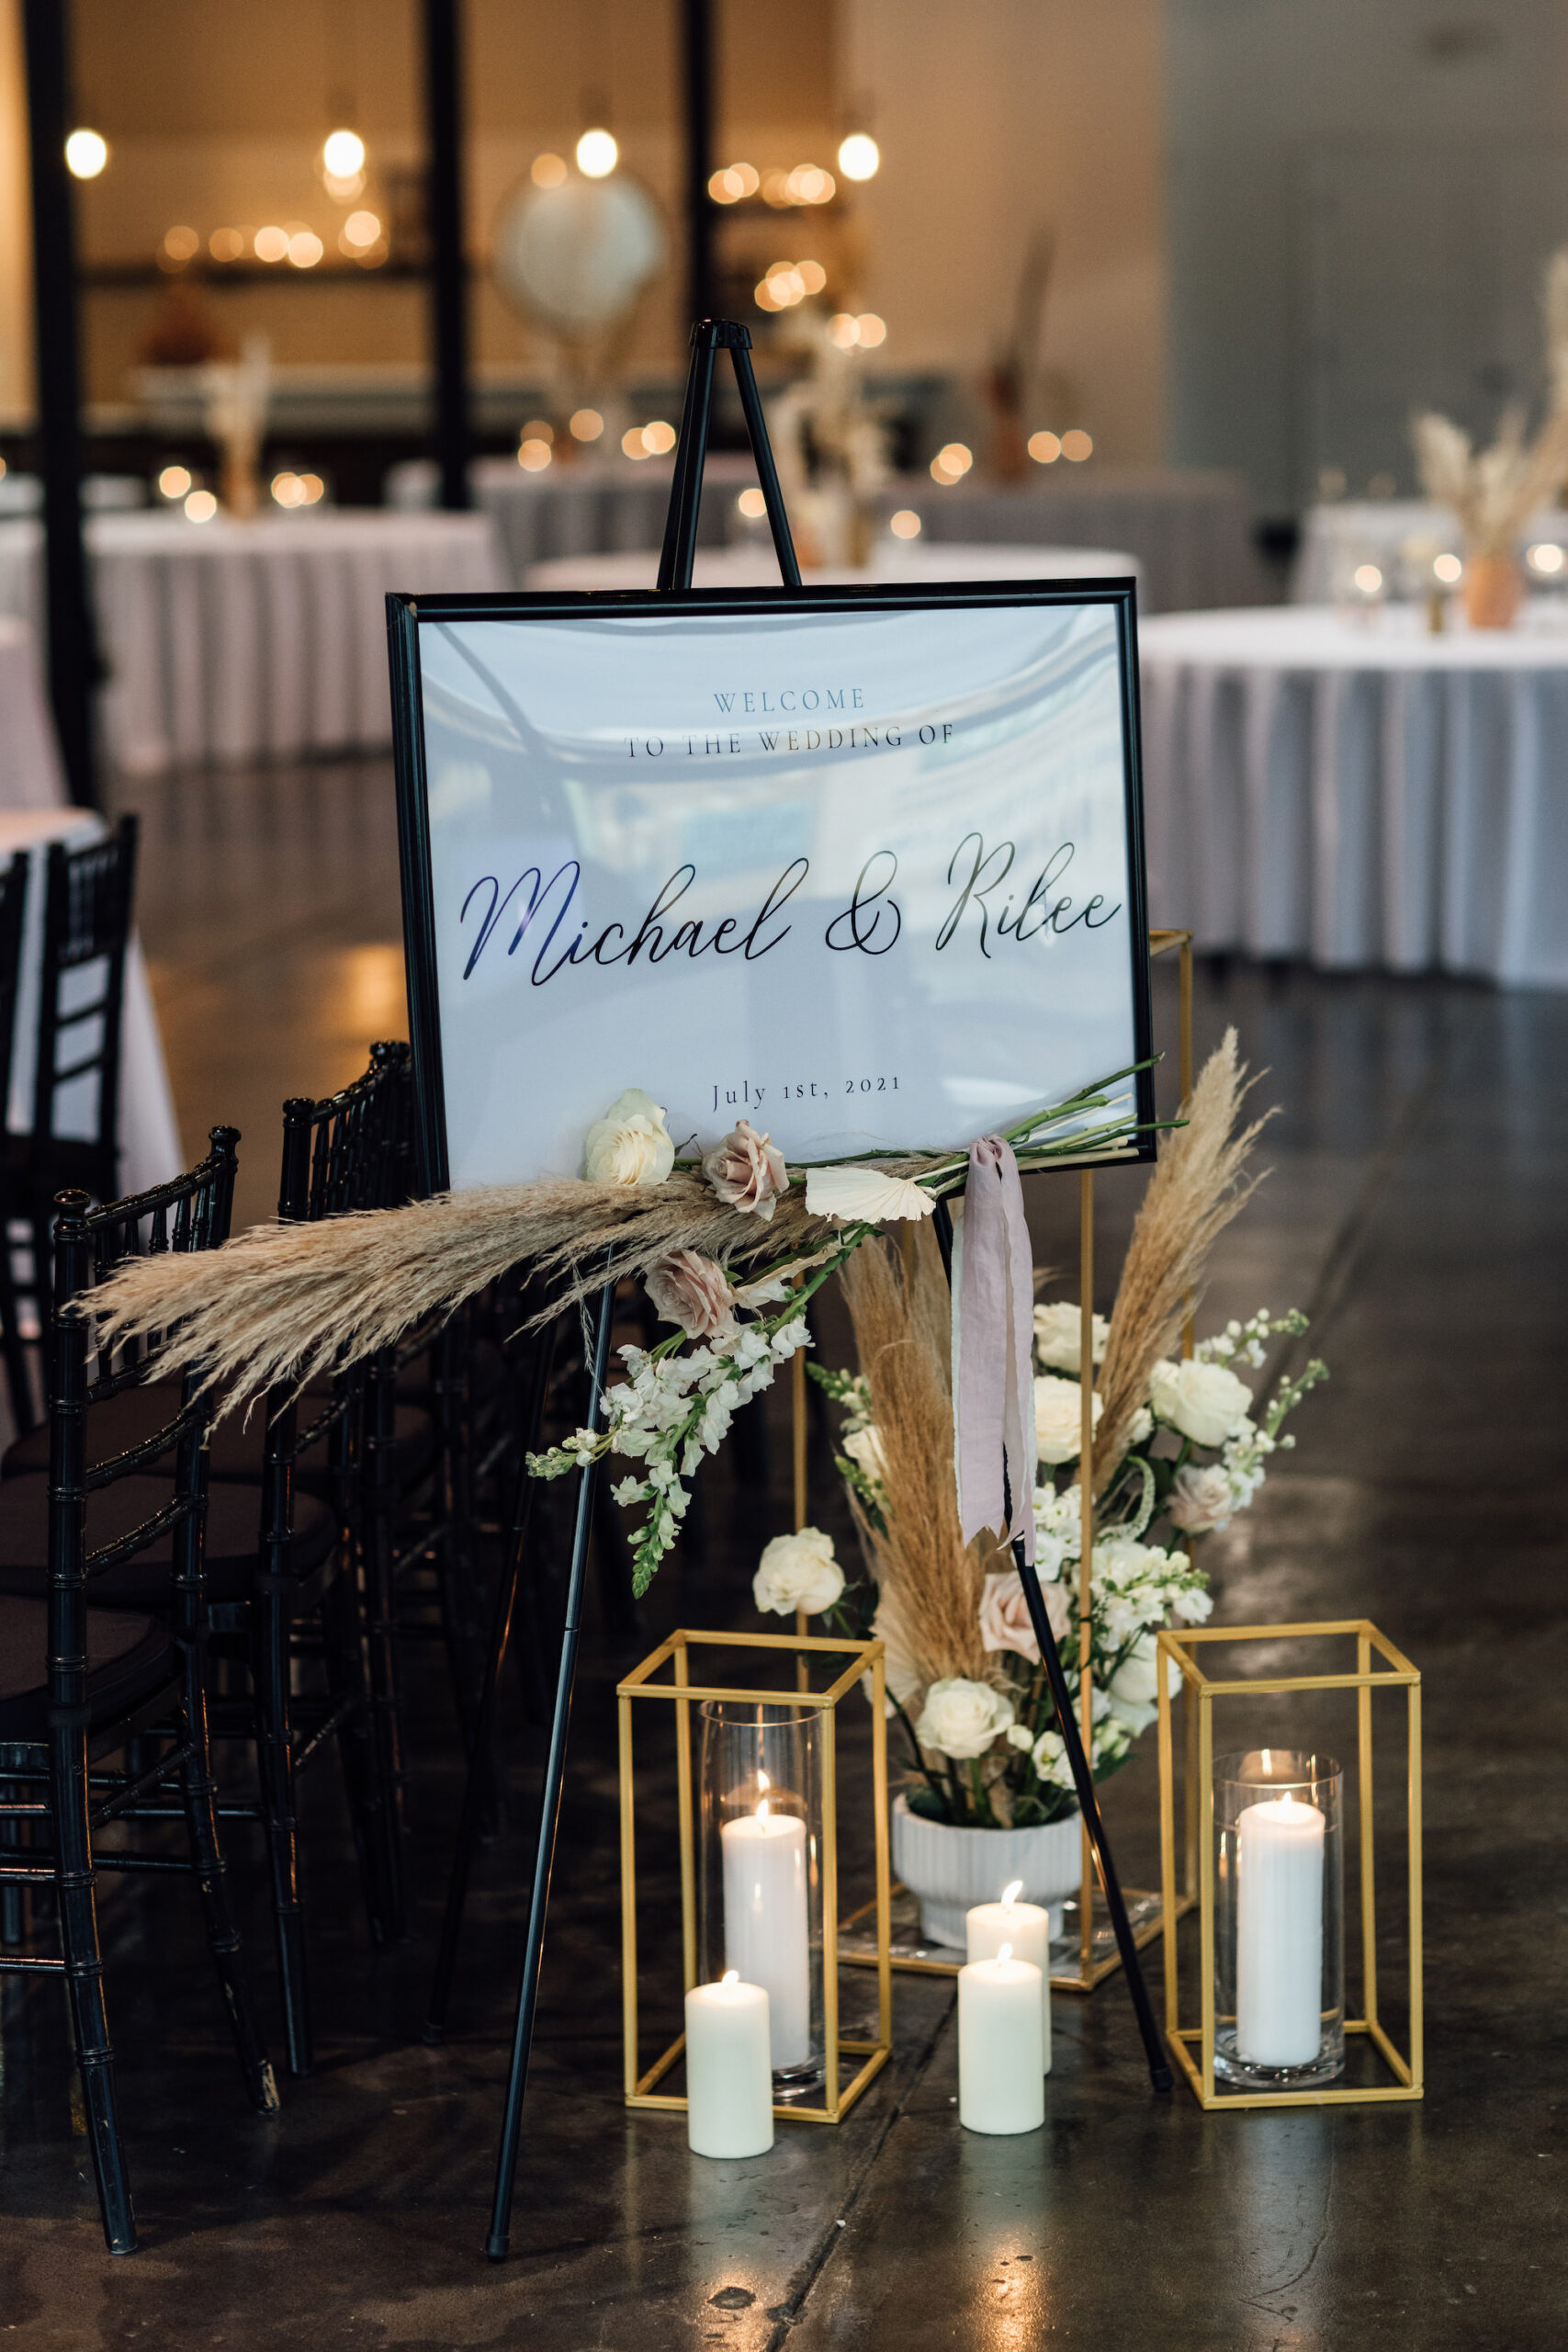 Modern Wedding Ceremony Welcome Frame Sign With Bohemian Floral Arrangements and Gold Candlelit Lanterns